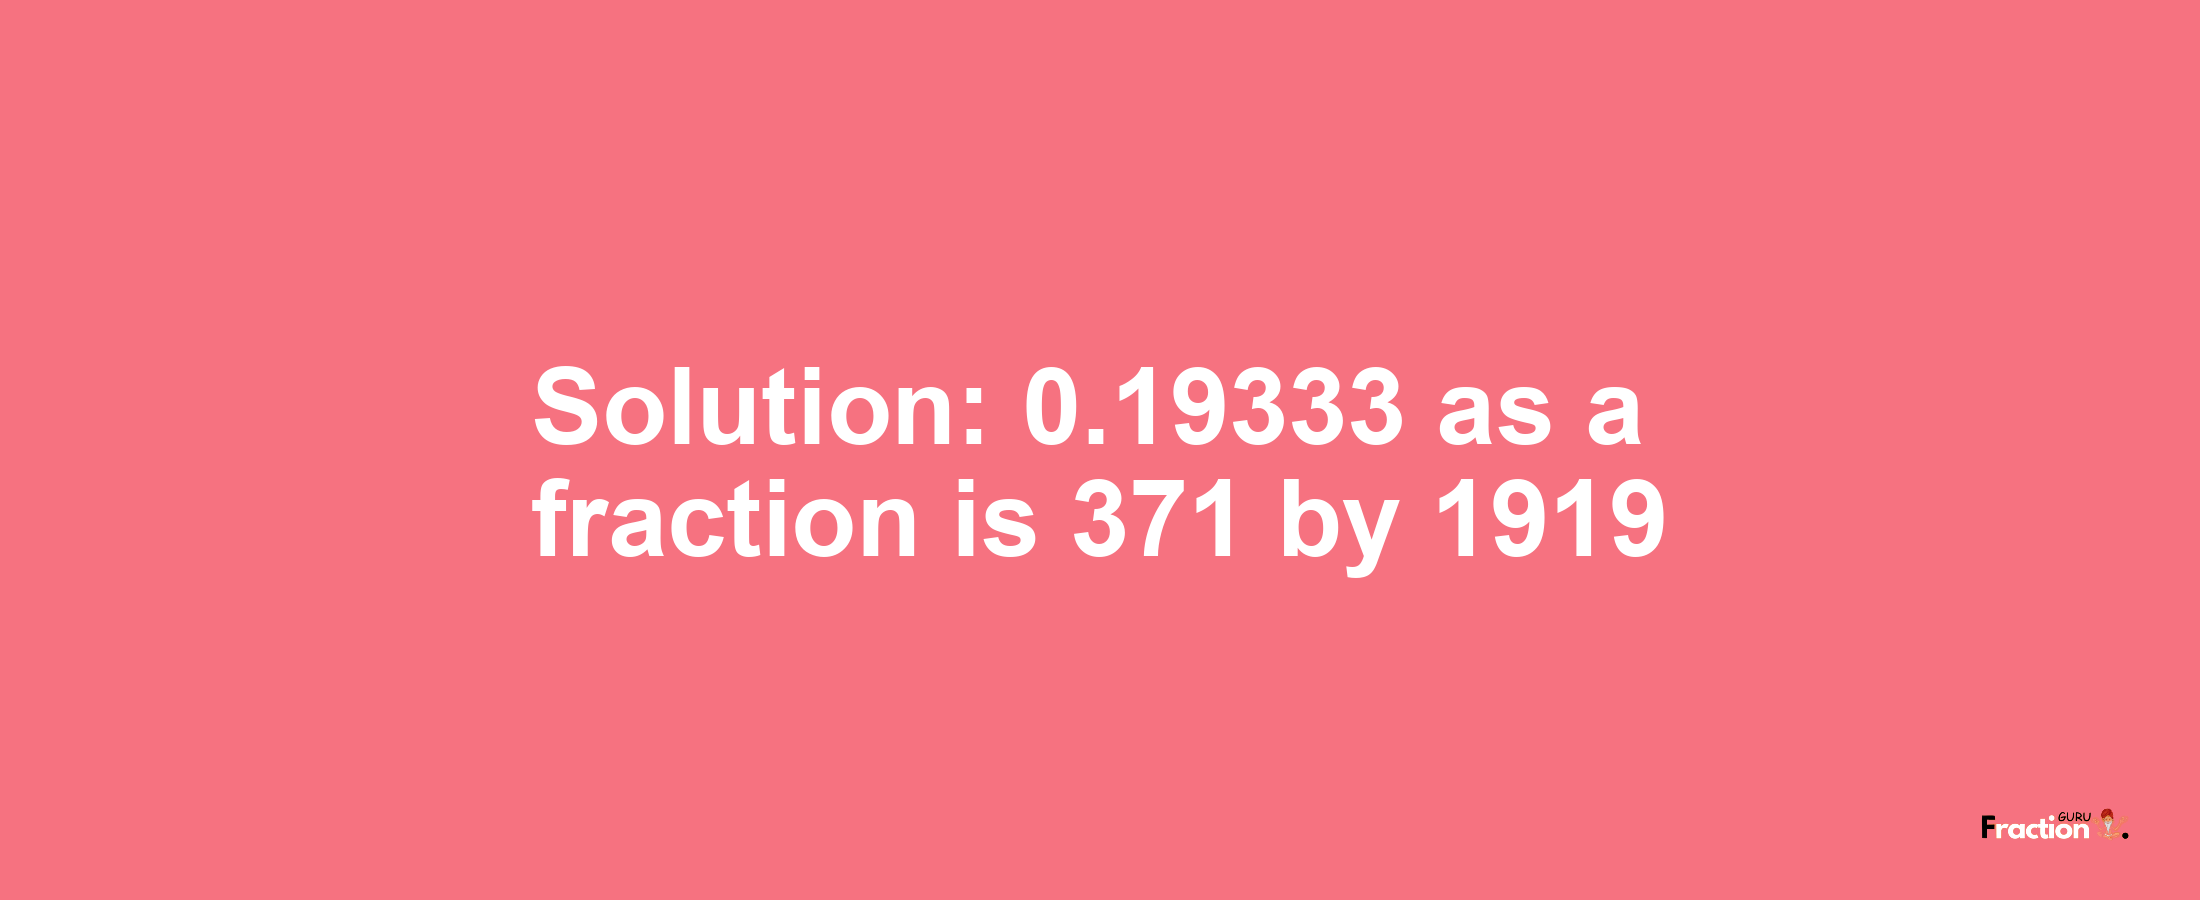 Solution:0.19333 as a fraction is 371/1919